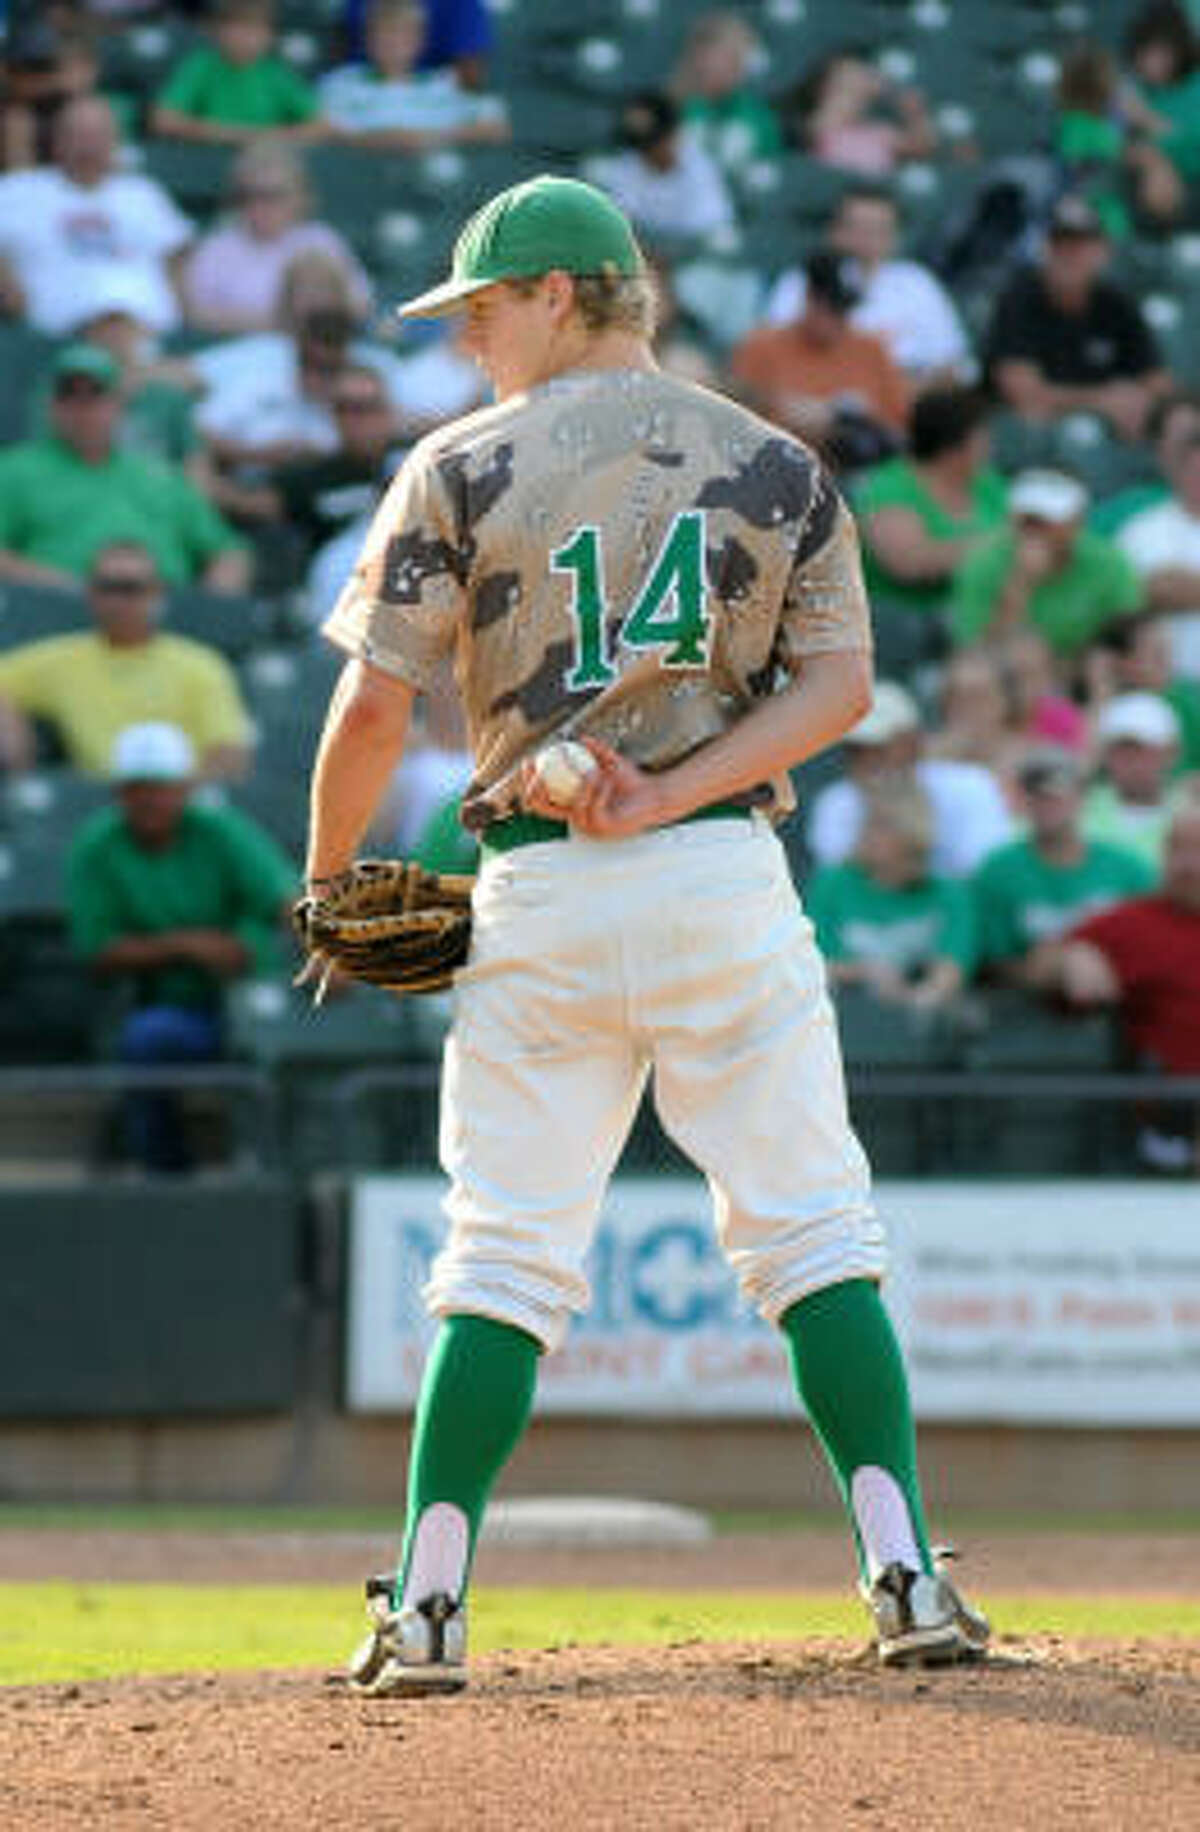 Brenham pitcher Chase Wellbrock was named MVP of the 4A state final after his complete game.